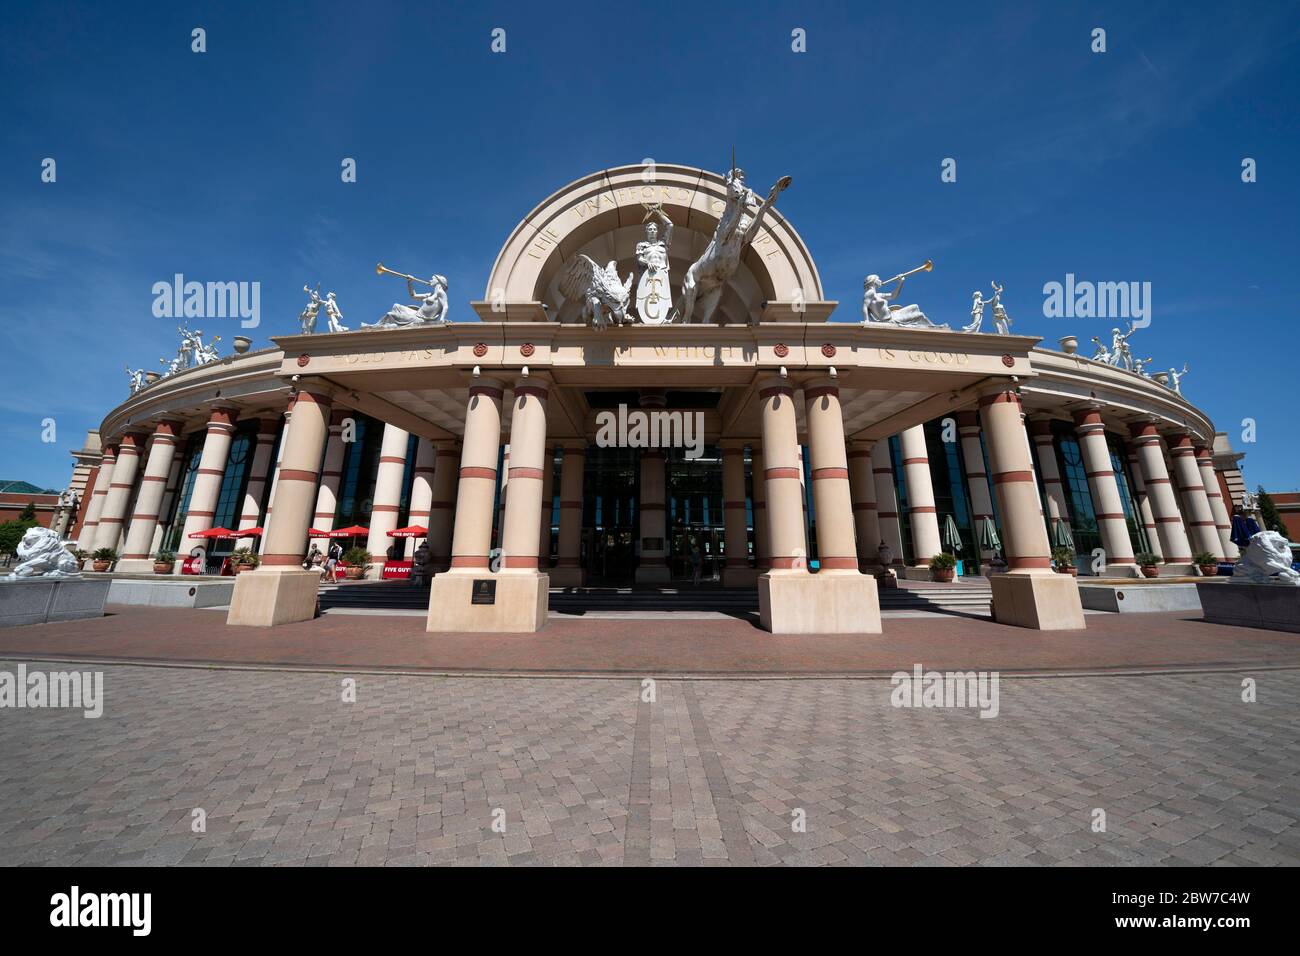 Manchester, UK. 29th May, 2020. Picture shows the INTU Trafford Centre in Manchester which has released details about how it will safely support the g Stock Photo